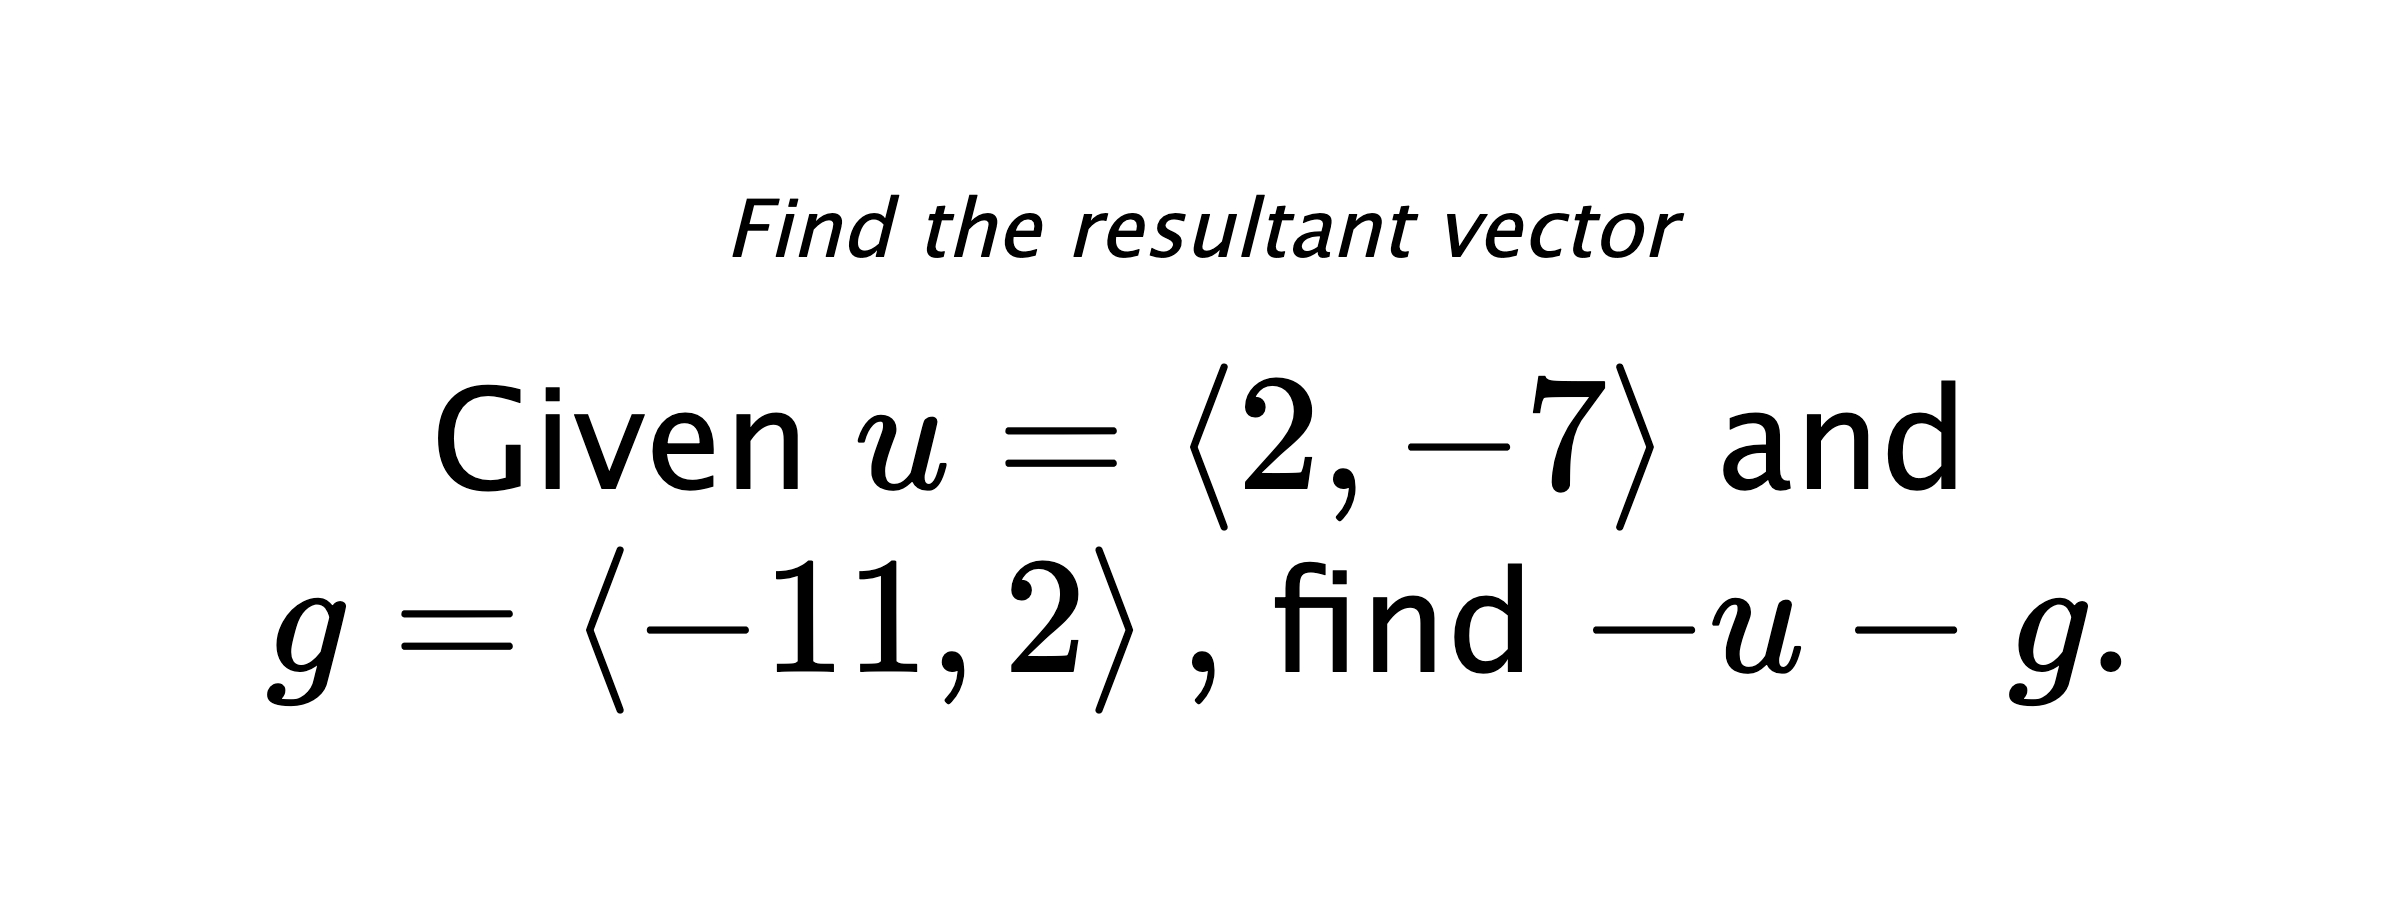 Find the resultant vector Given $ u = \left< 2,-7 \right> $ and $ g = \left< -11,2 \right> ,$ find $ -u-g .$